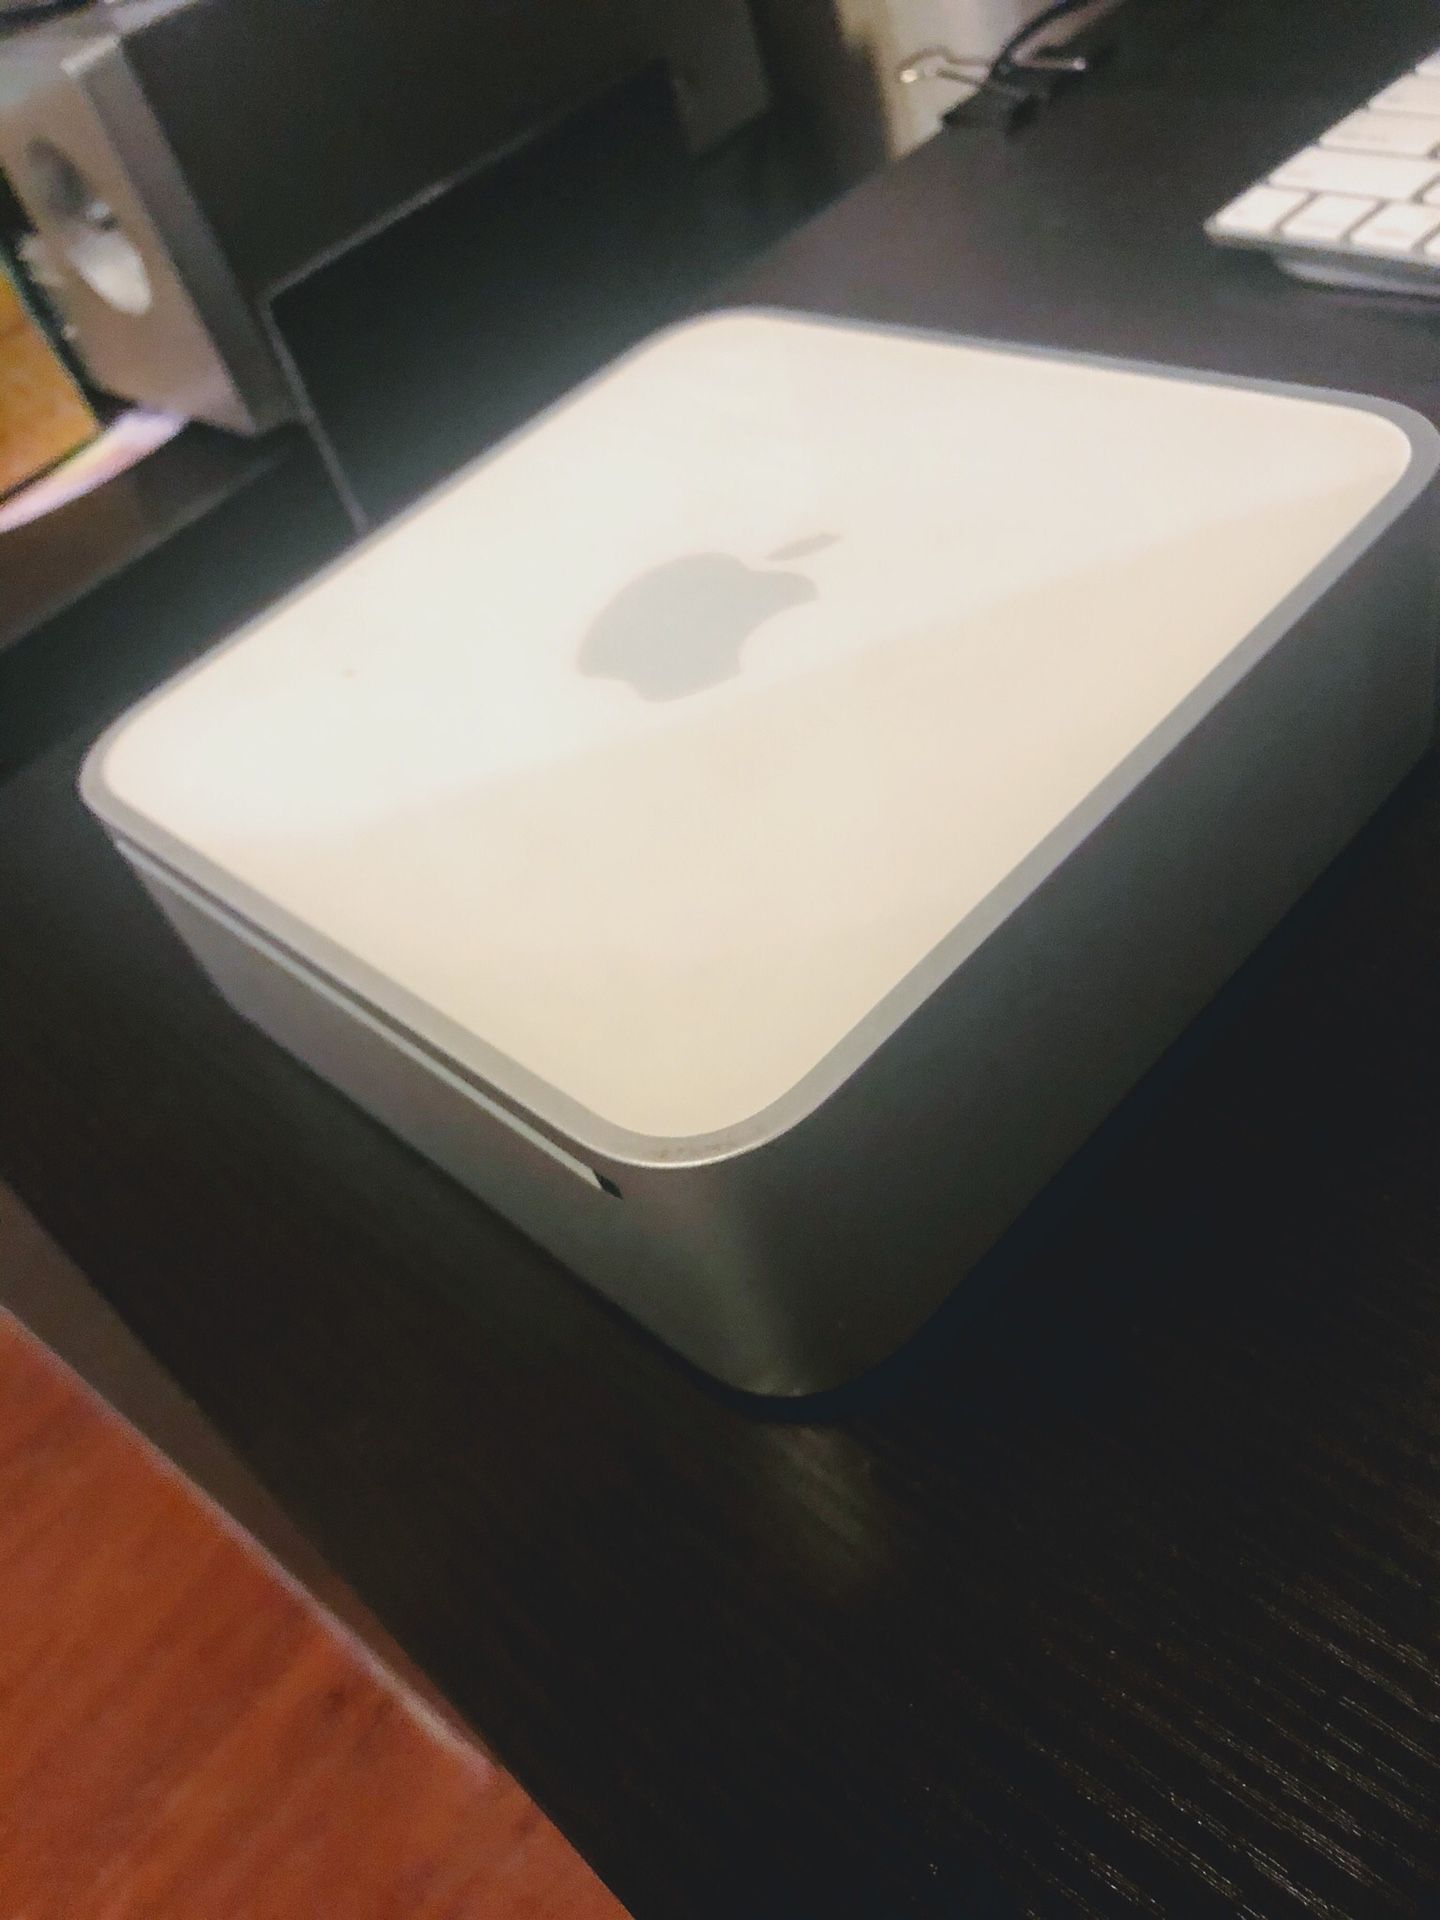 Mac Mini Early 2009, Great Condition